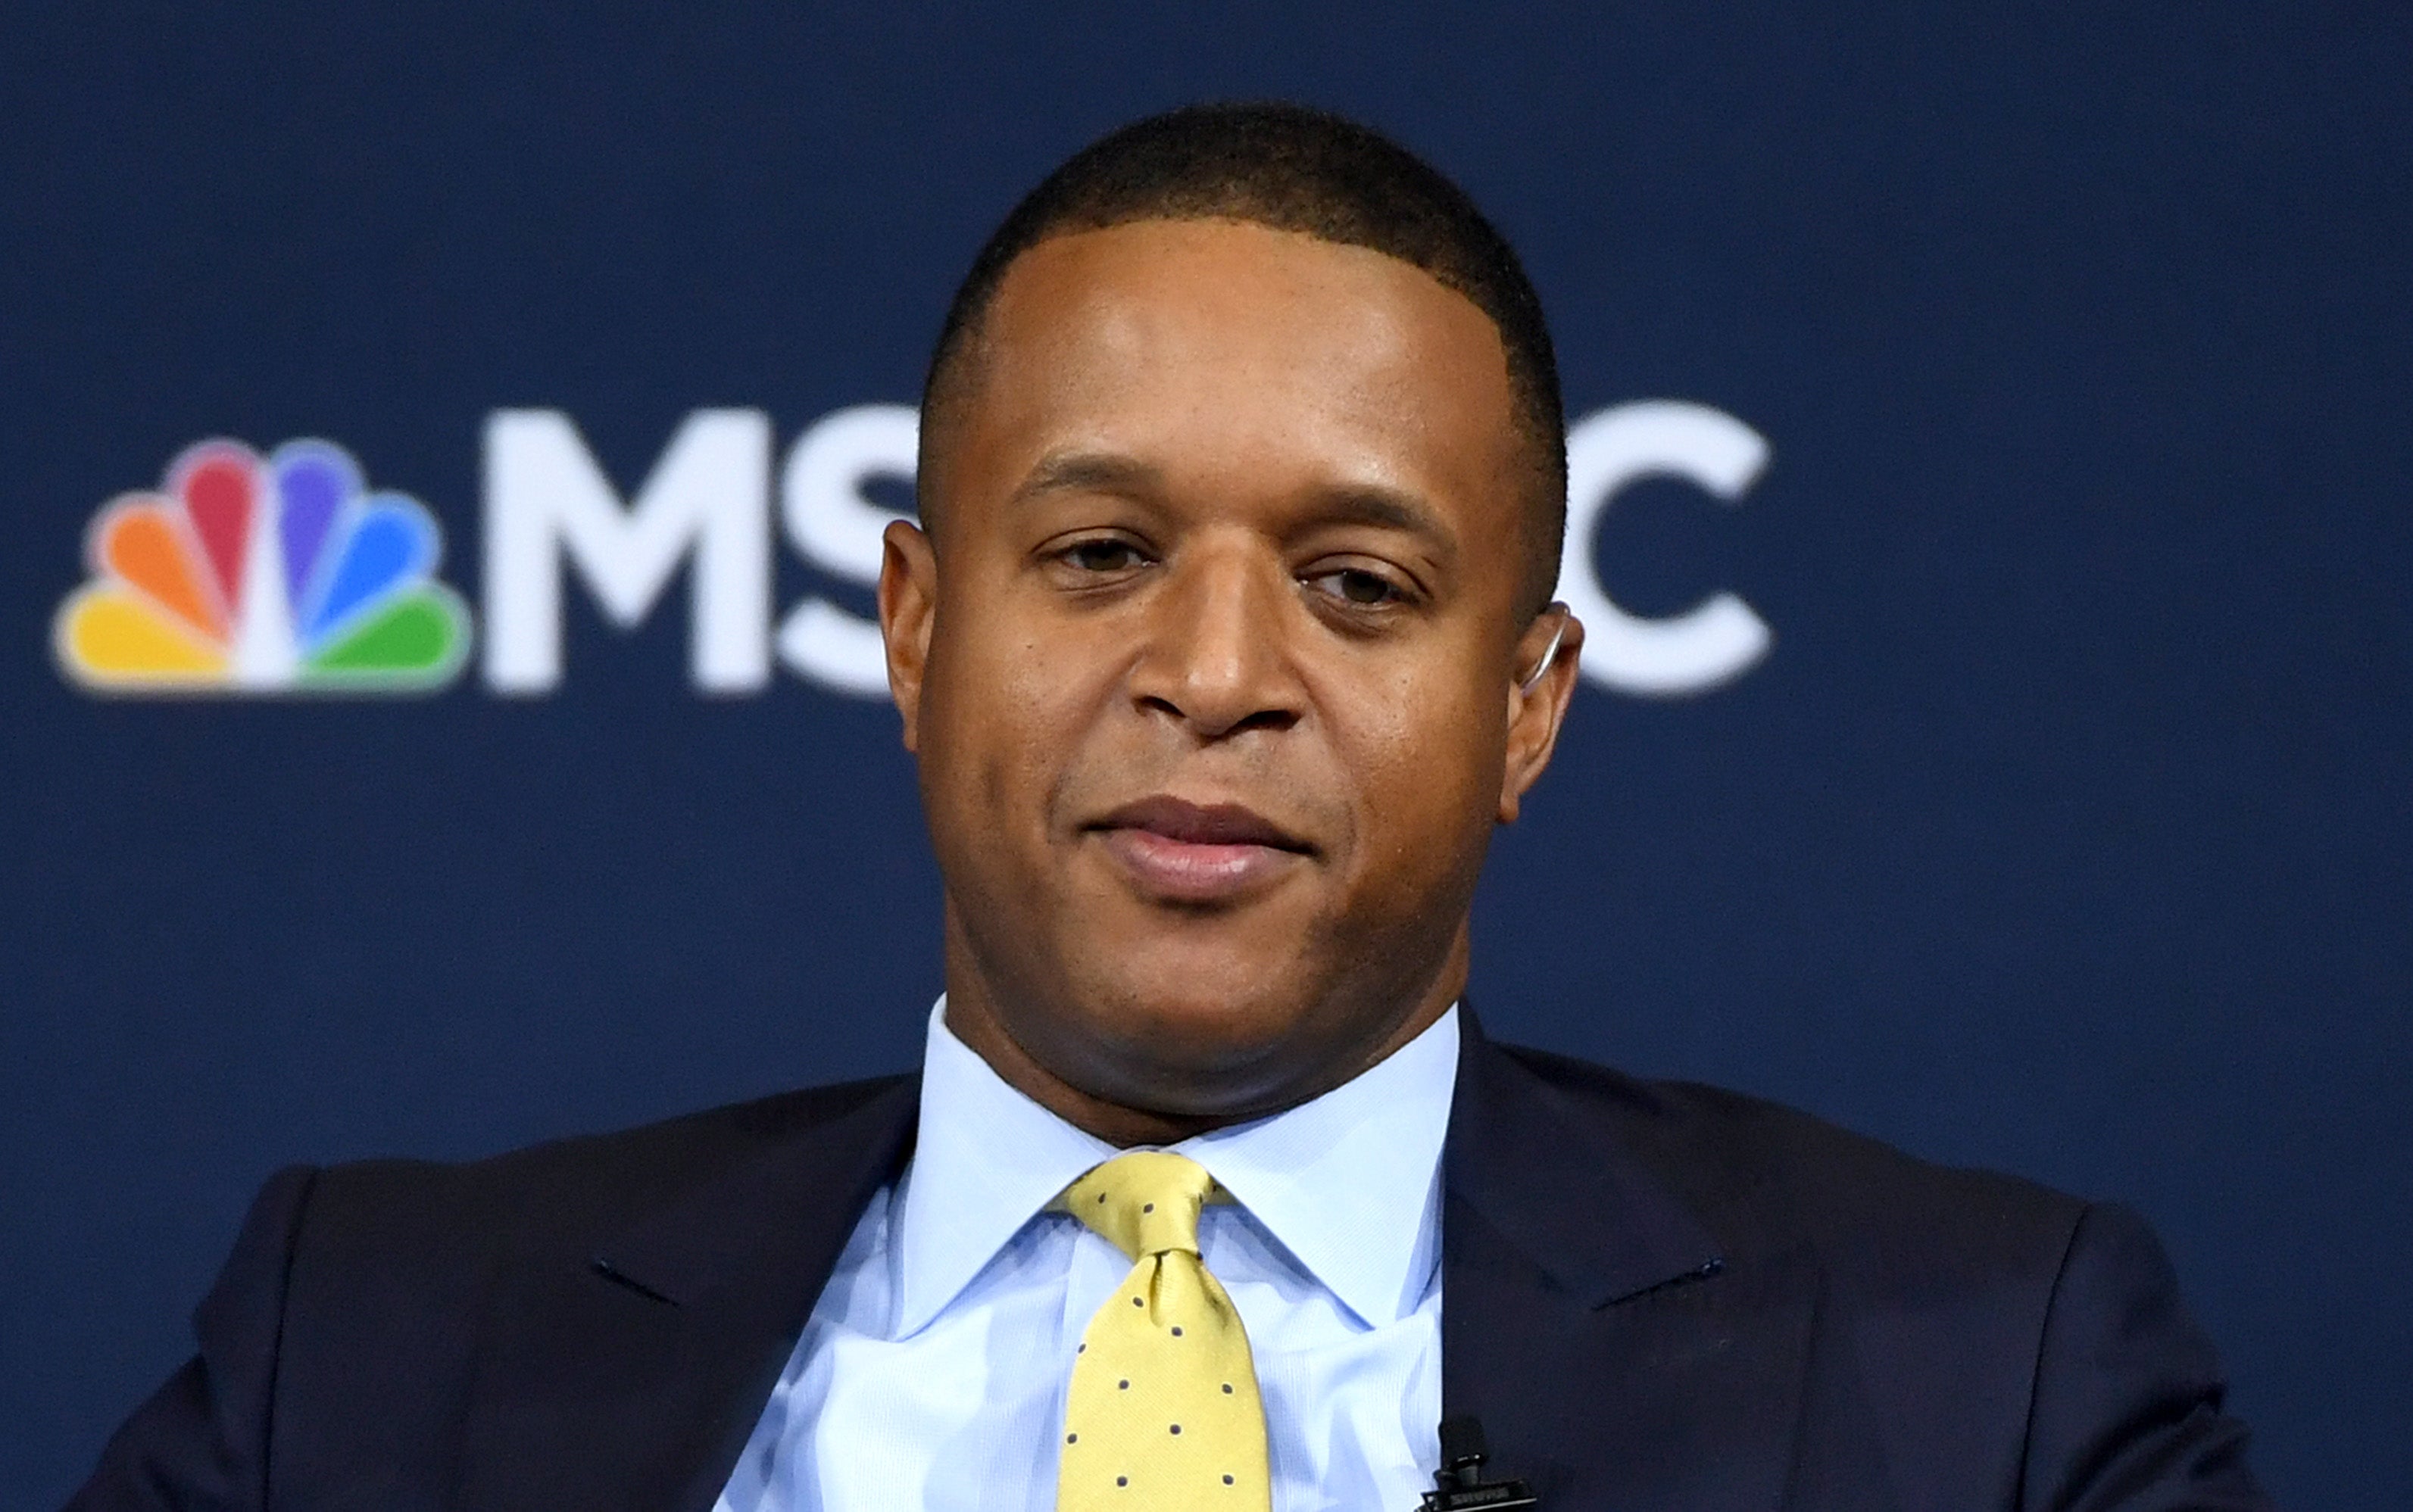 today-show-host-craig-melvin-s-brother-dies-from-colon-cancer-at-43